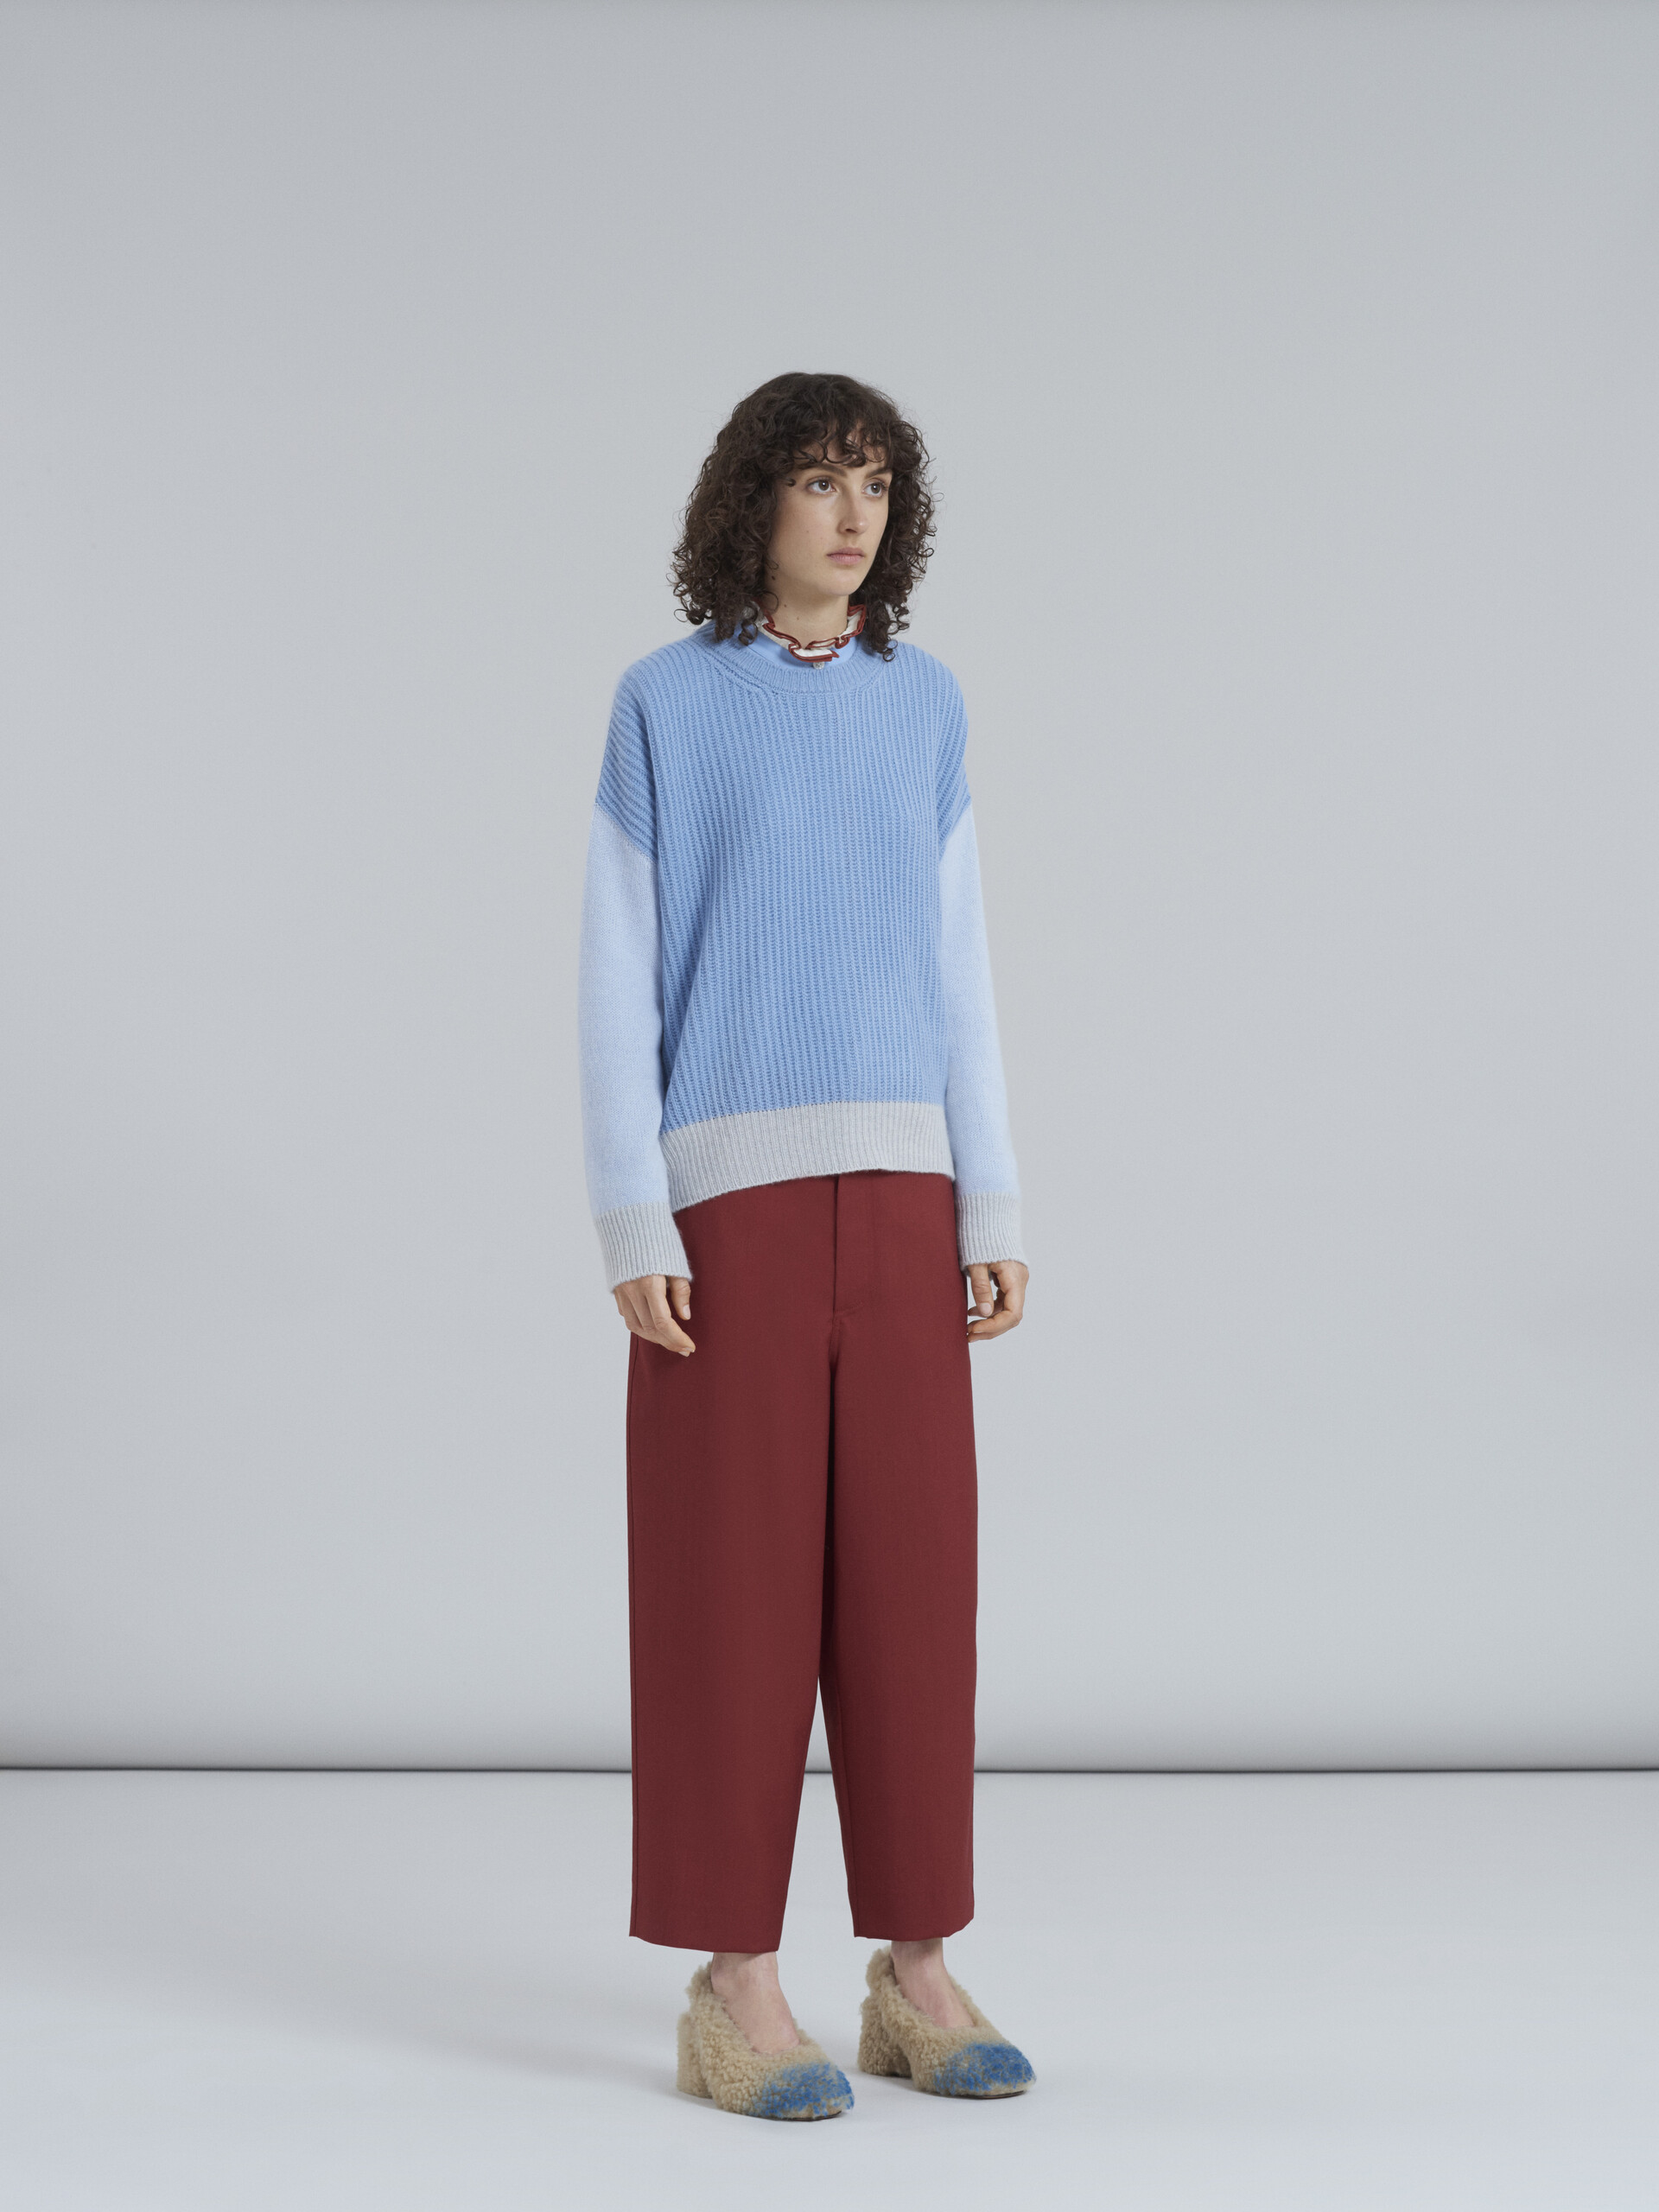 Cashmere sweater with colour-block pattern - Pullovers - Image 3